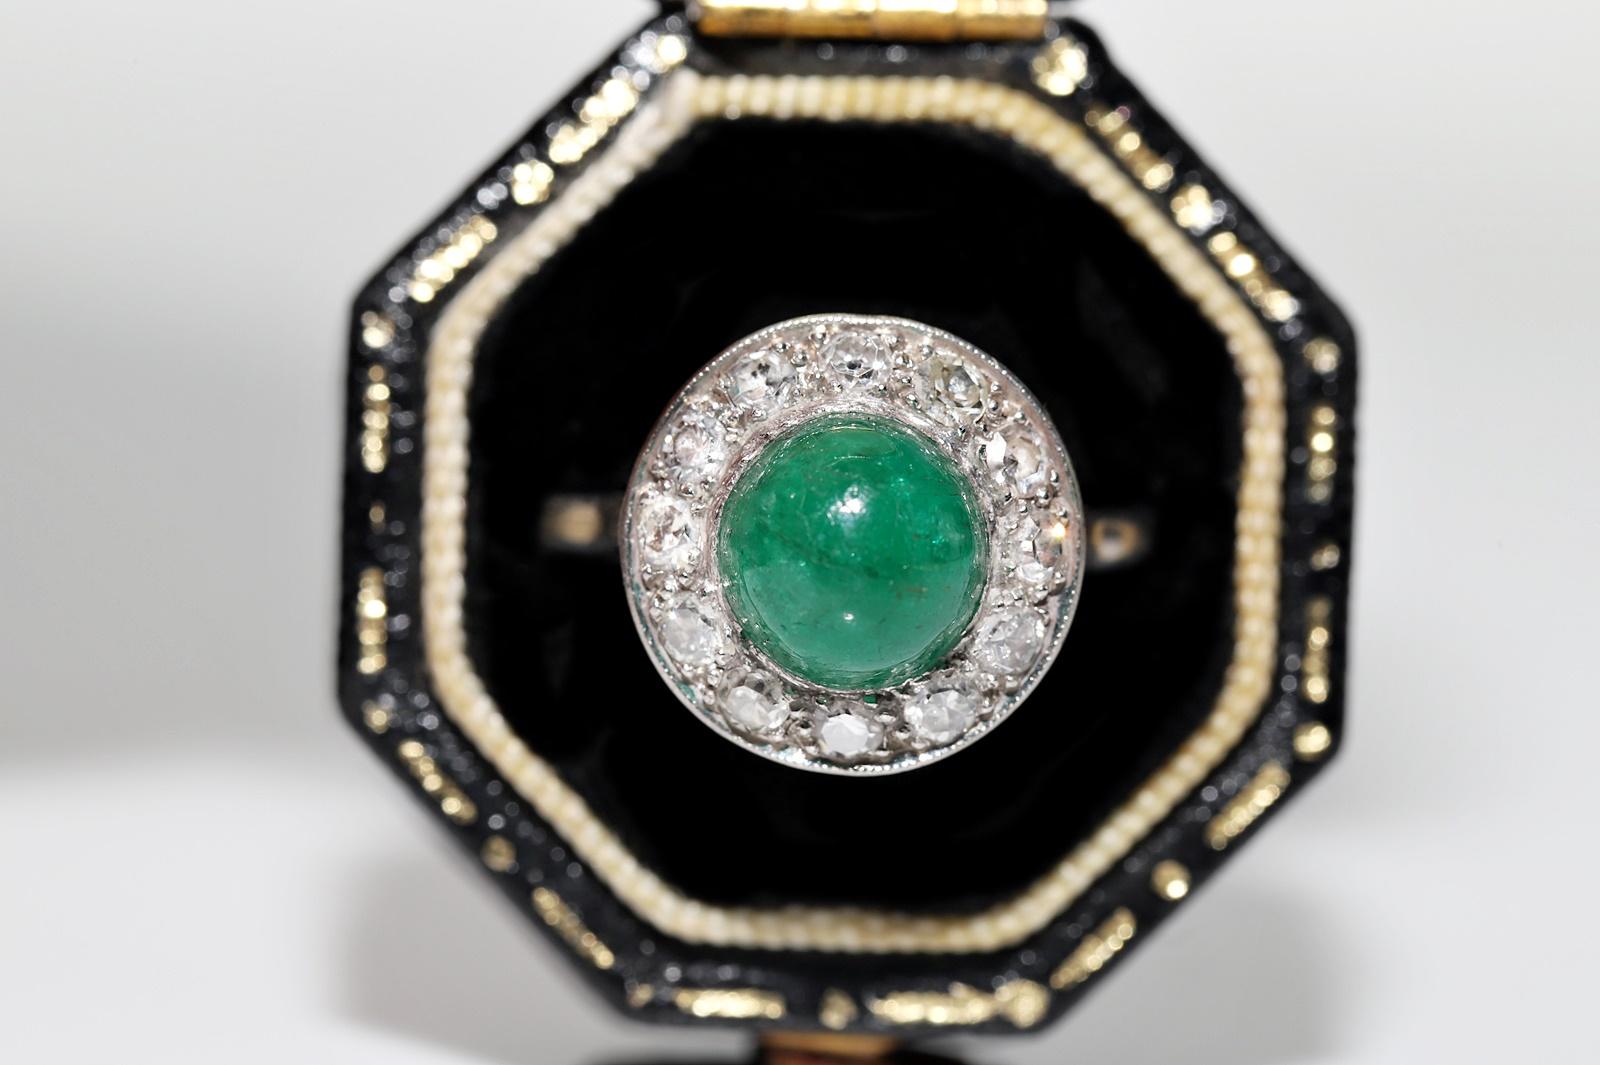 In very good condition.
Total weight is 5.5 grams.
Totally is diamond 0.65 ct.
The diamond is has G-H color and s1-s2 clarity.
Totally is emerald 2 ct.
Ring size is US 6.5 (We offer free resizing)
We can make any size.
Box is not included.
Please